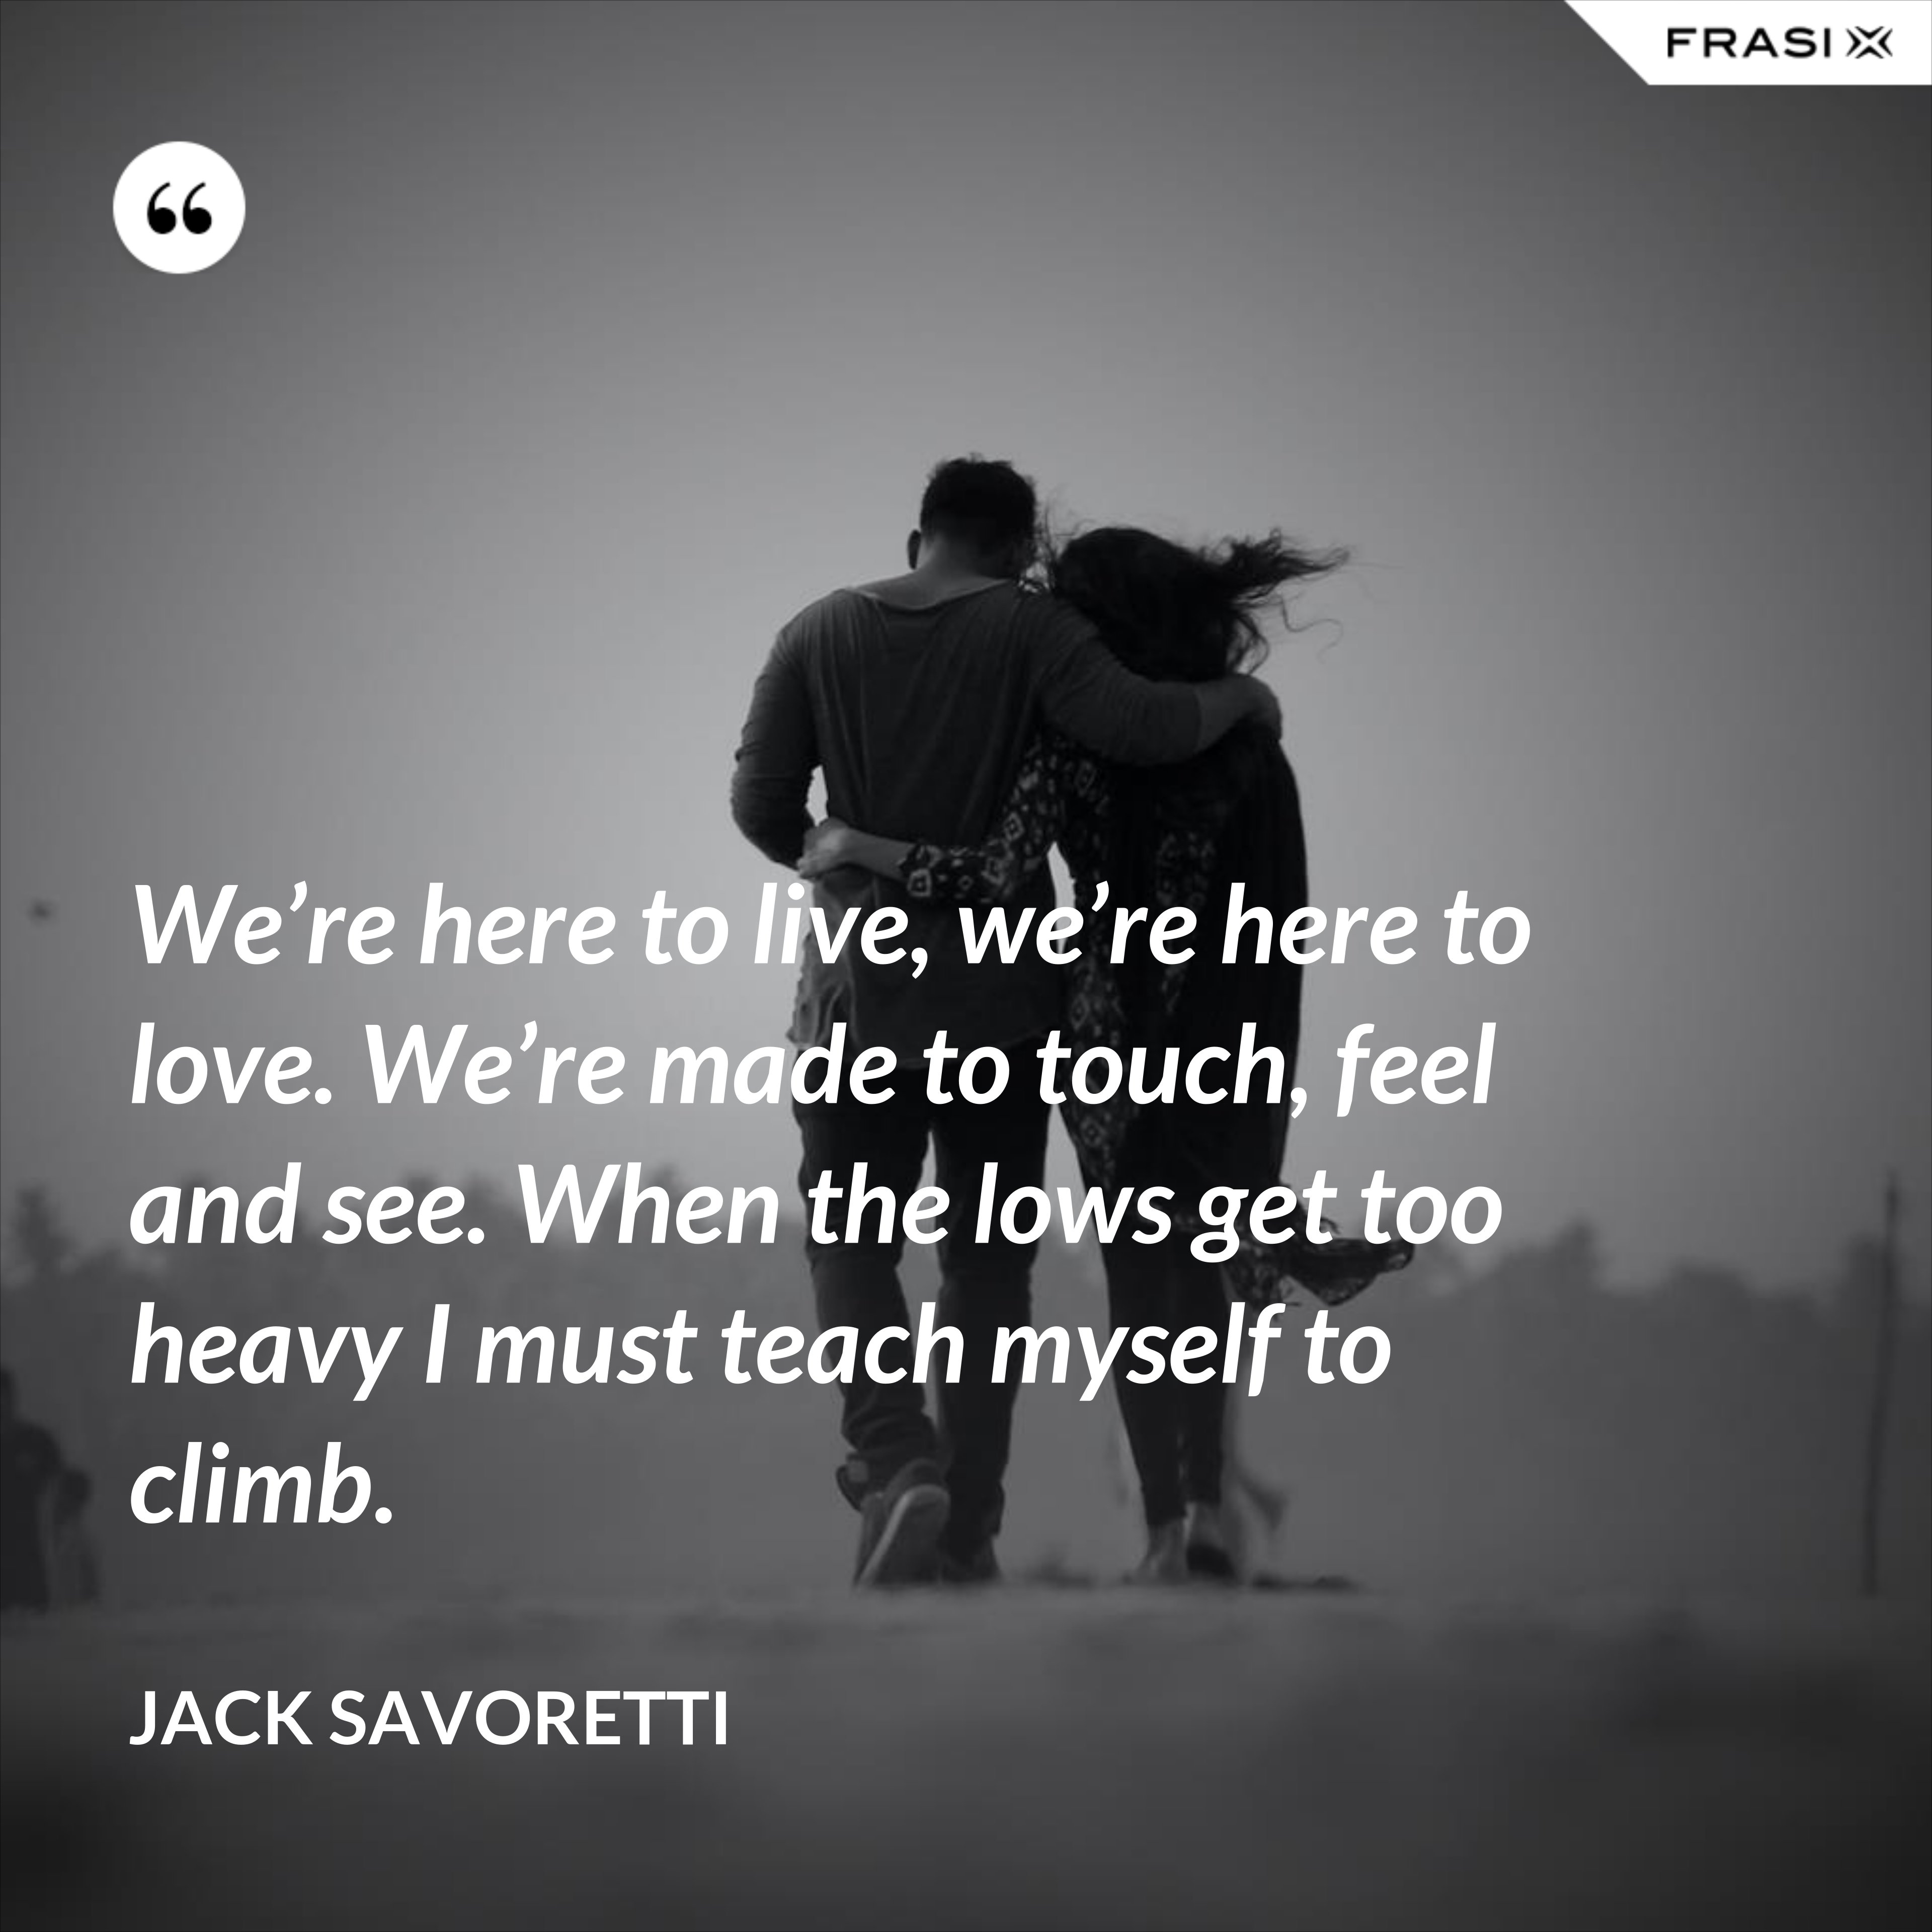 We’re here to live, we’re here to love. We’re made to touch, feel and see. When the lows get too heavy I must teach myself to climb. - Jack Savoretti